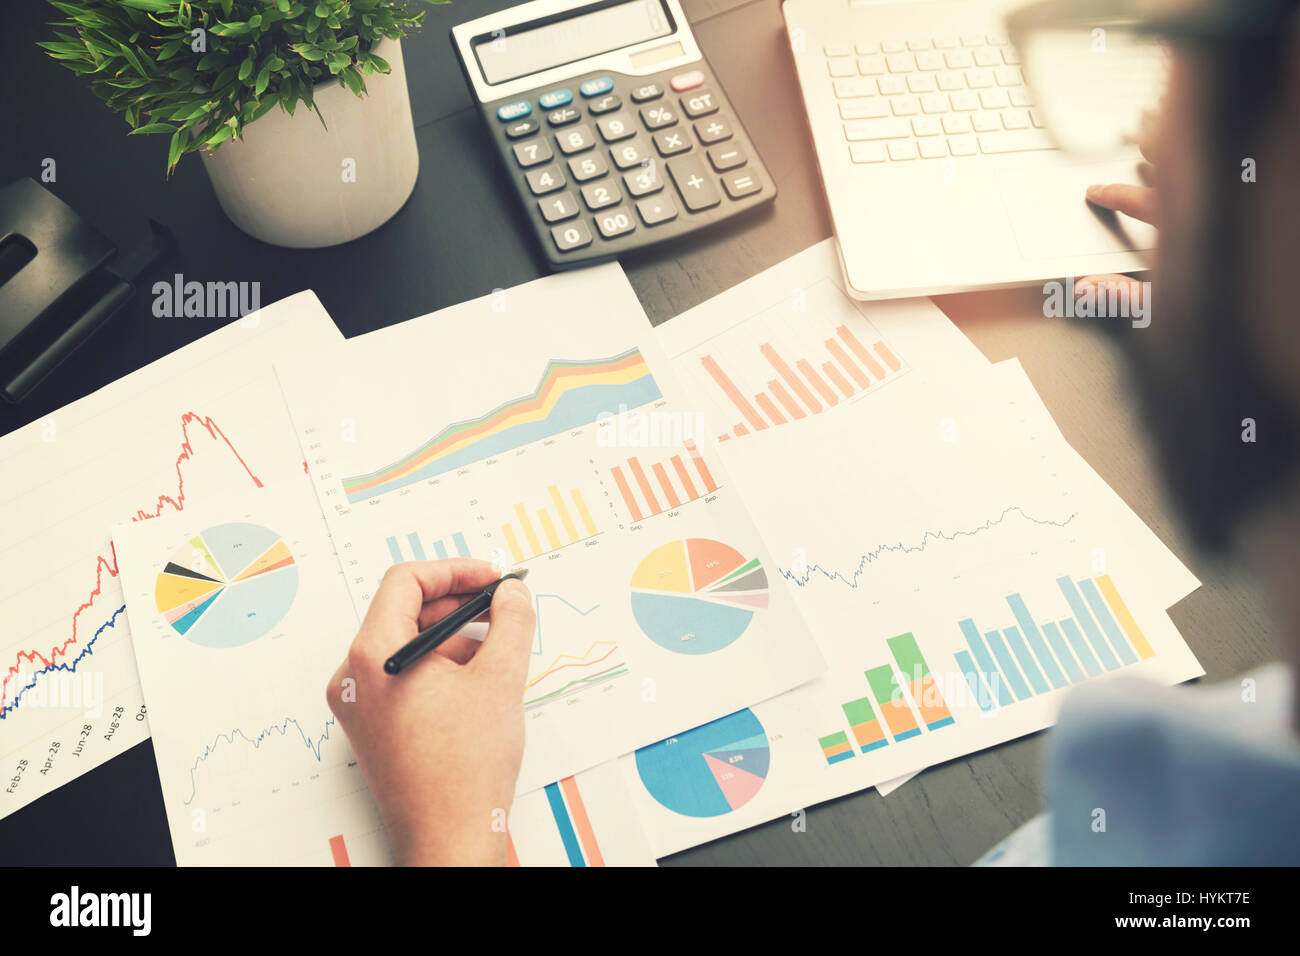 business analysis - man working with financial data charts at office Stock Photo